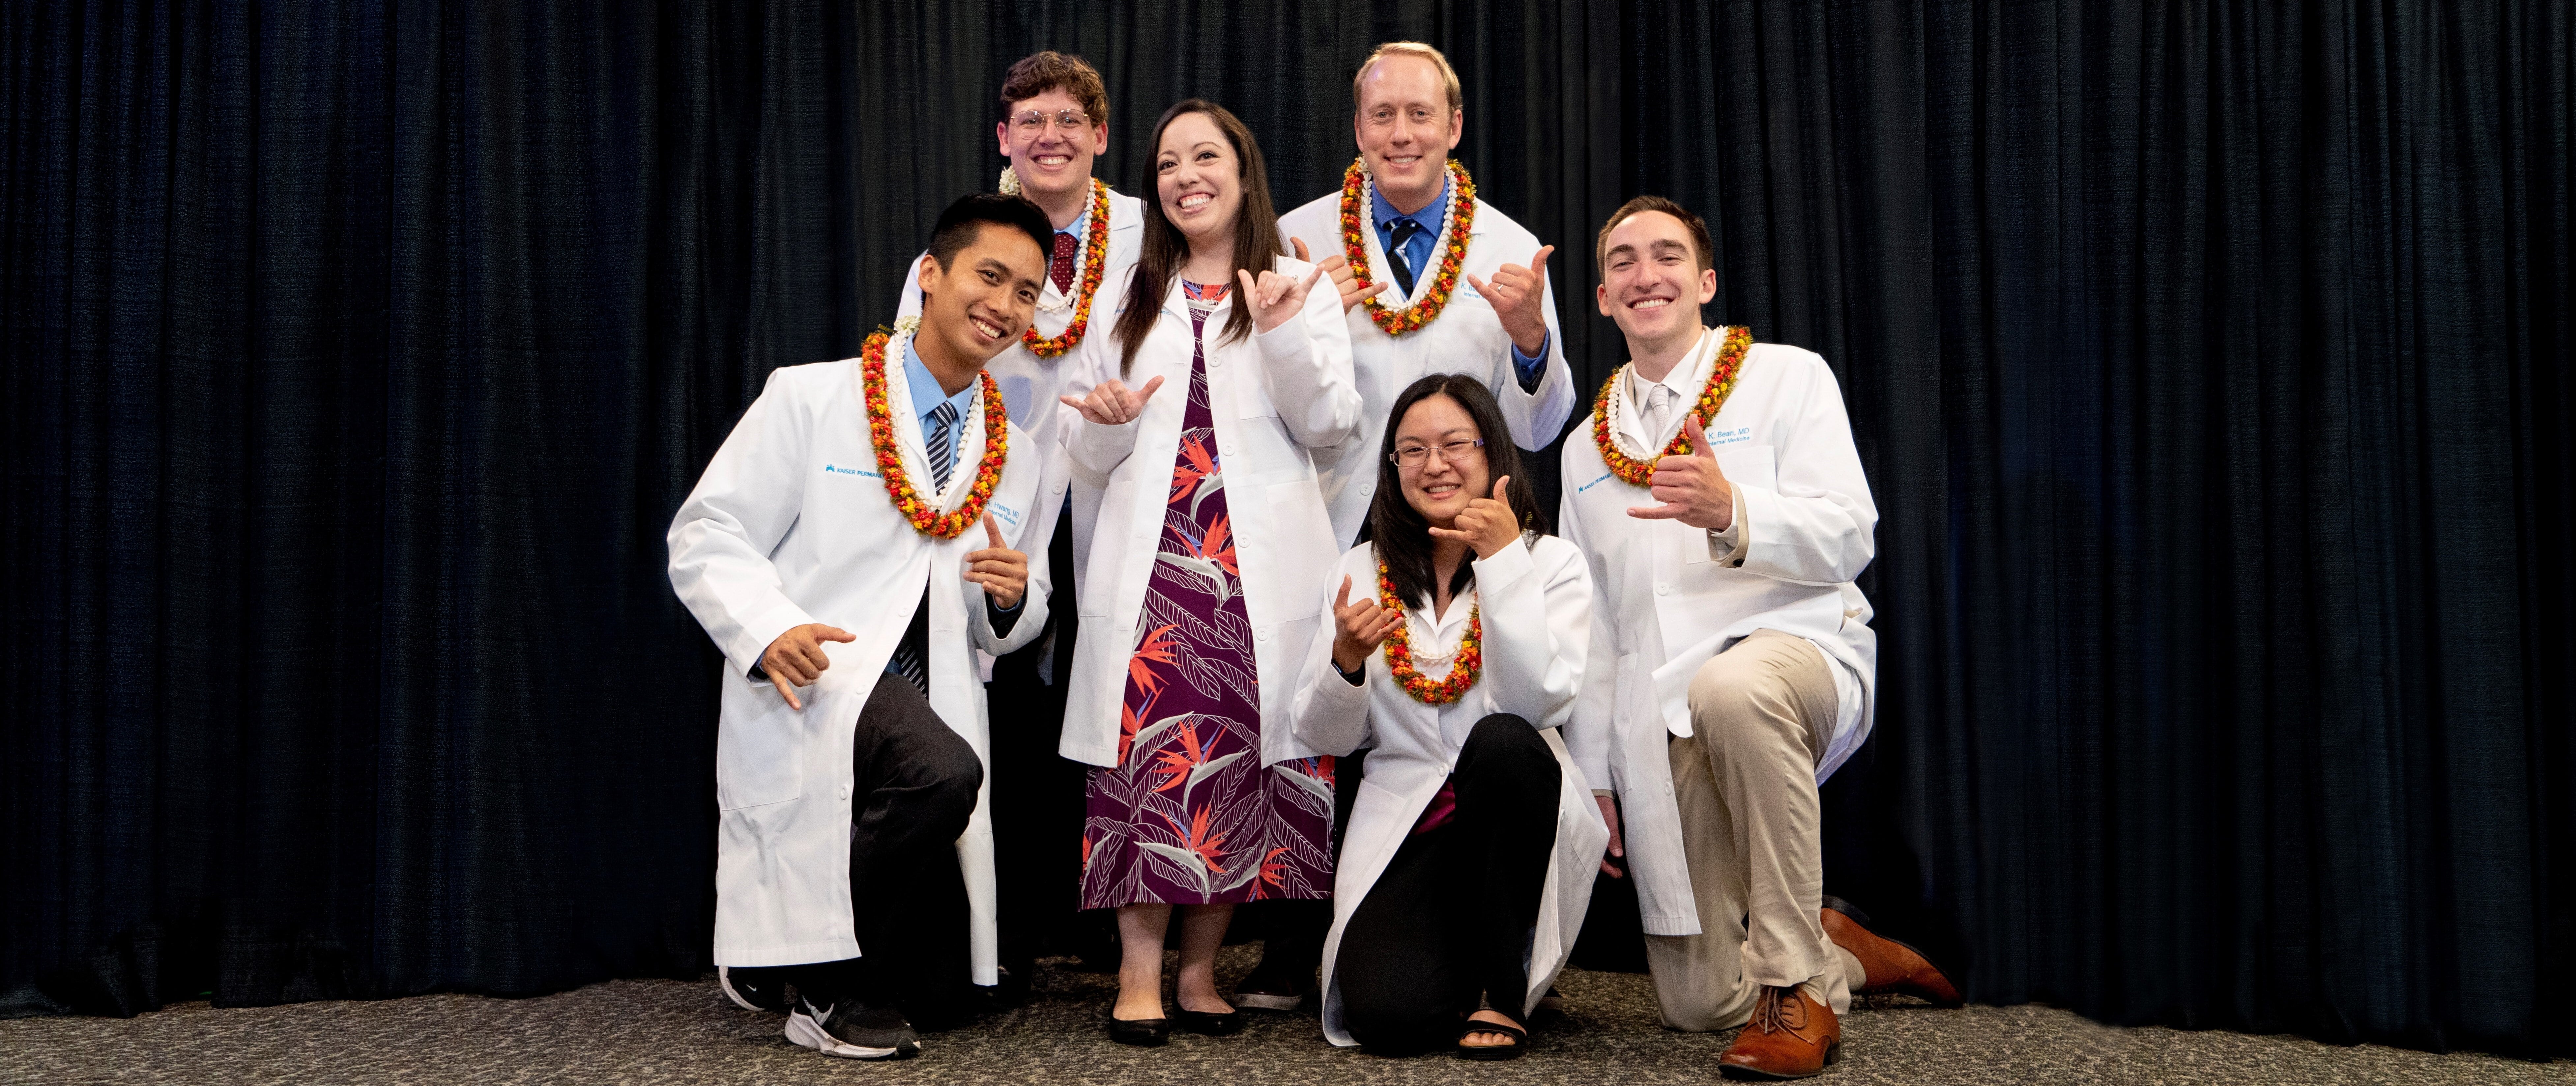 Kaiser permanente hawaii internal medicine residency incivility in healthcare how we can change the culture